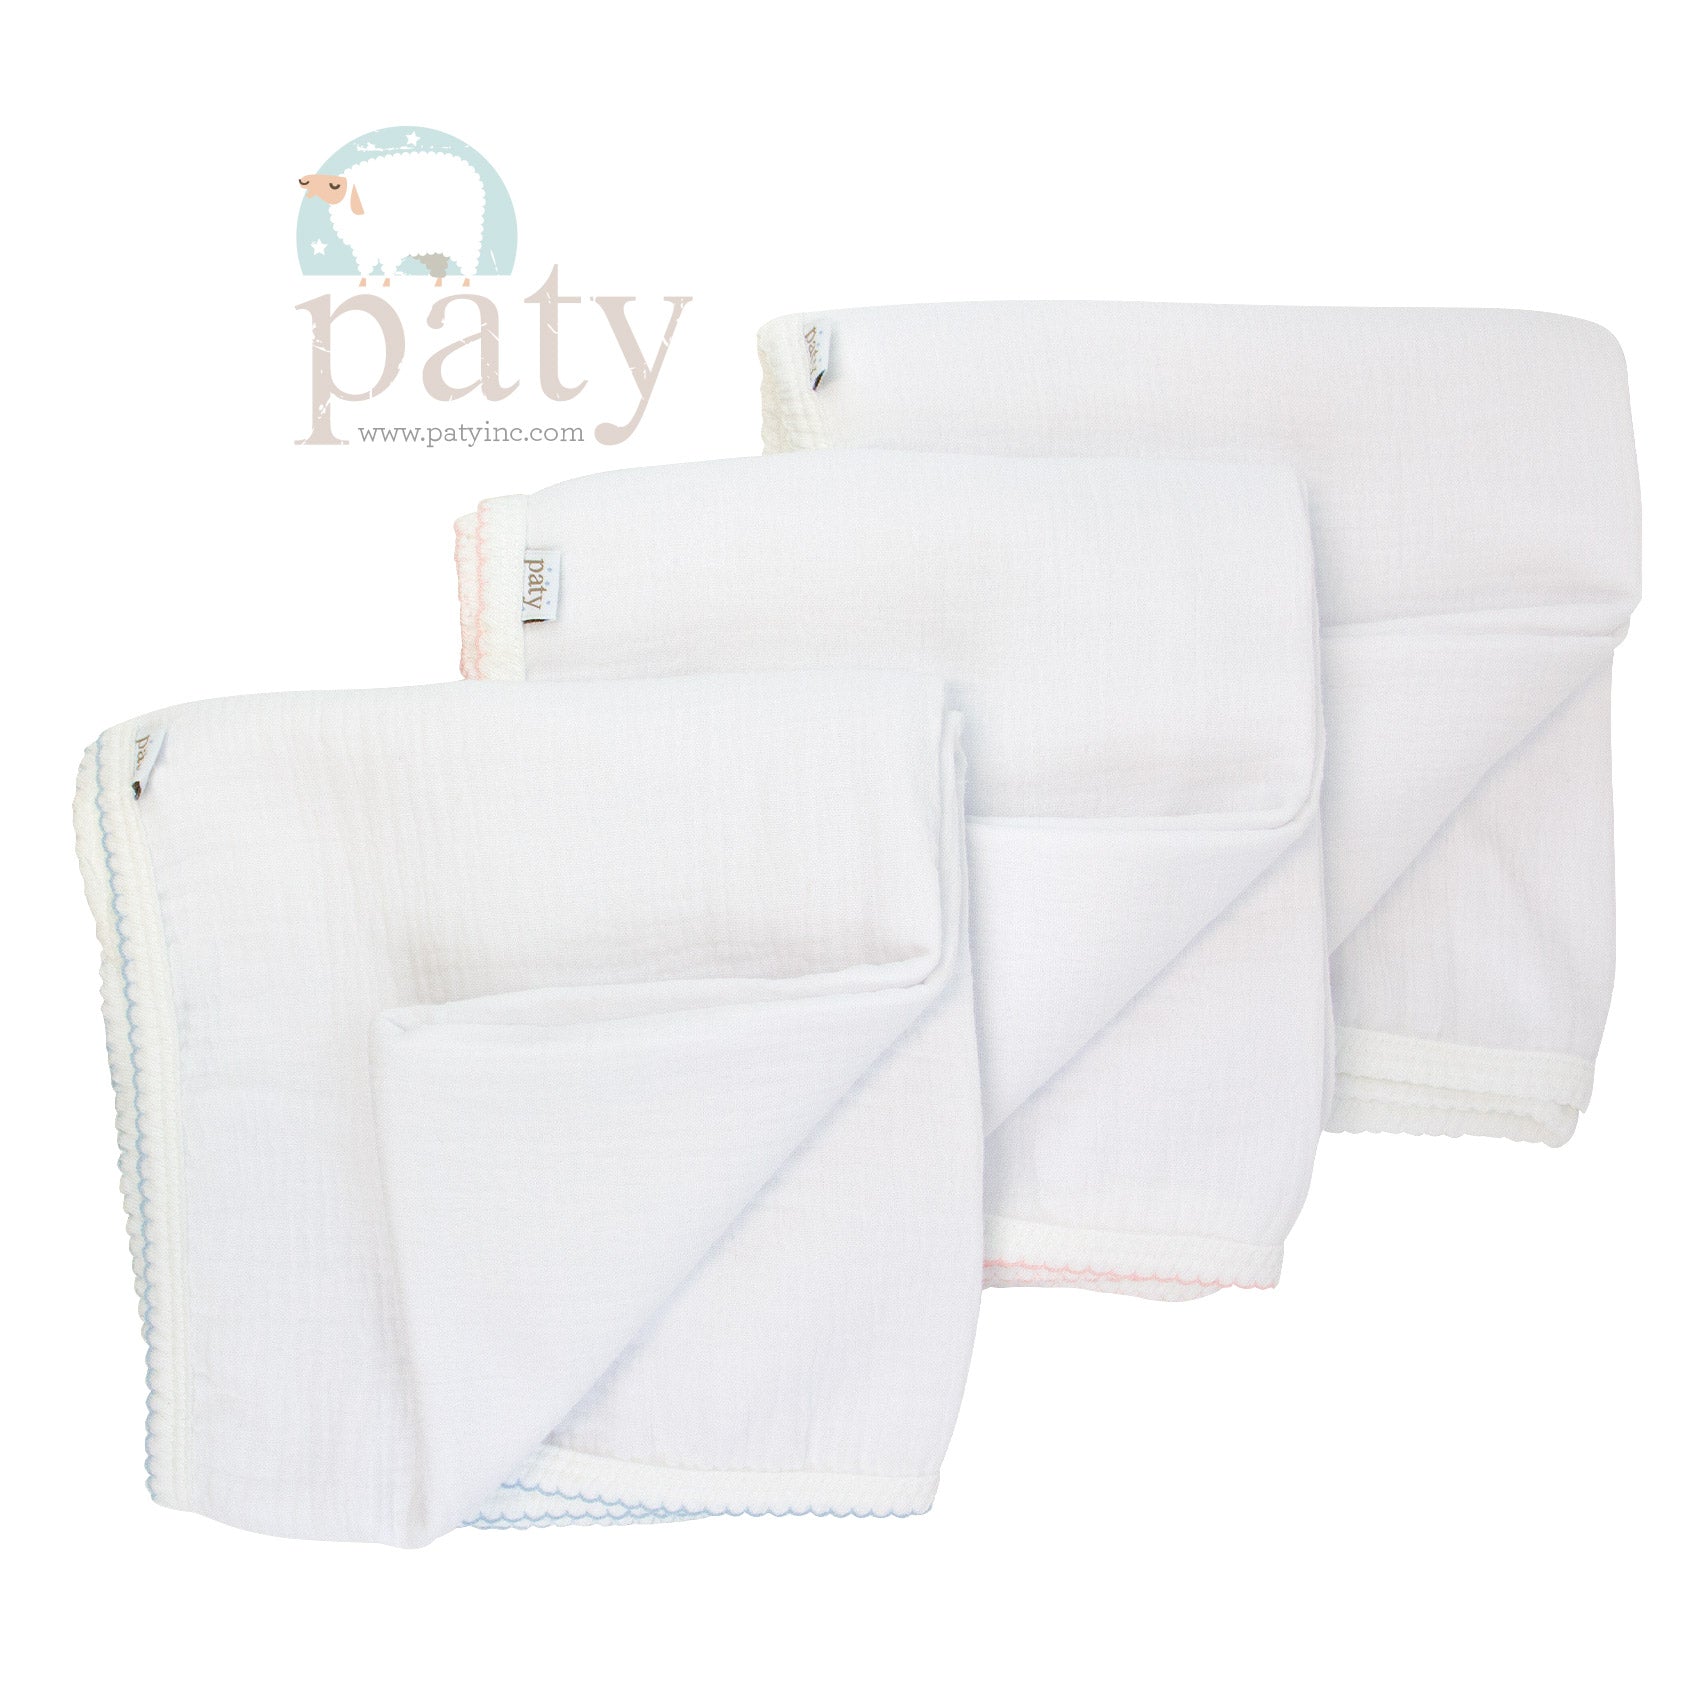 A set of three Paty Blankets on a white background.